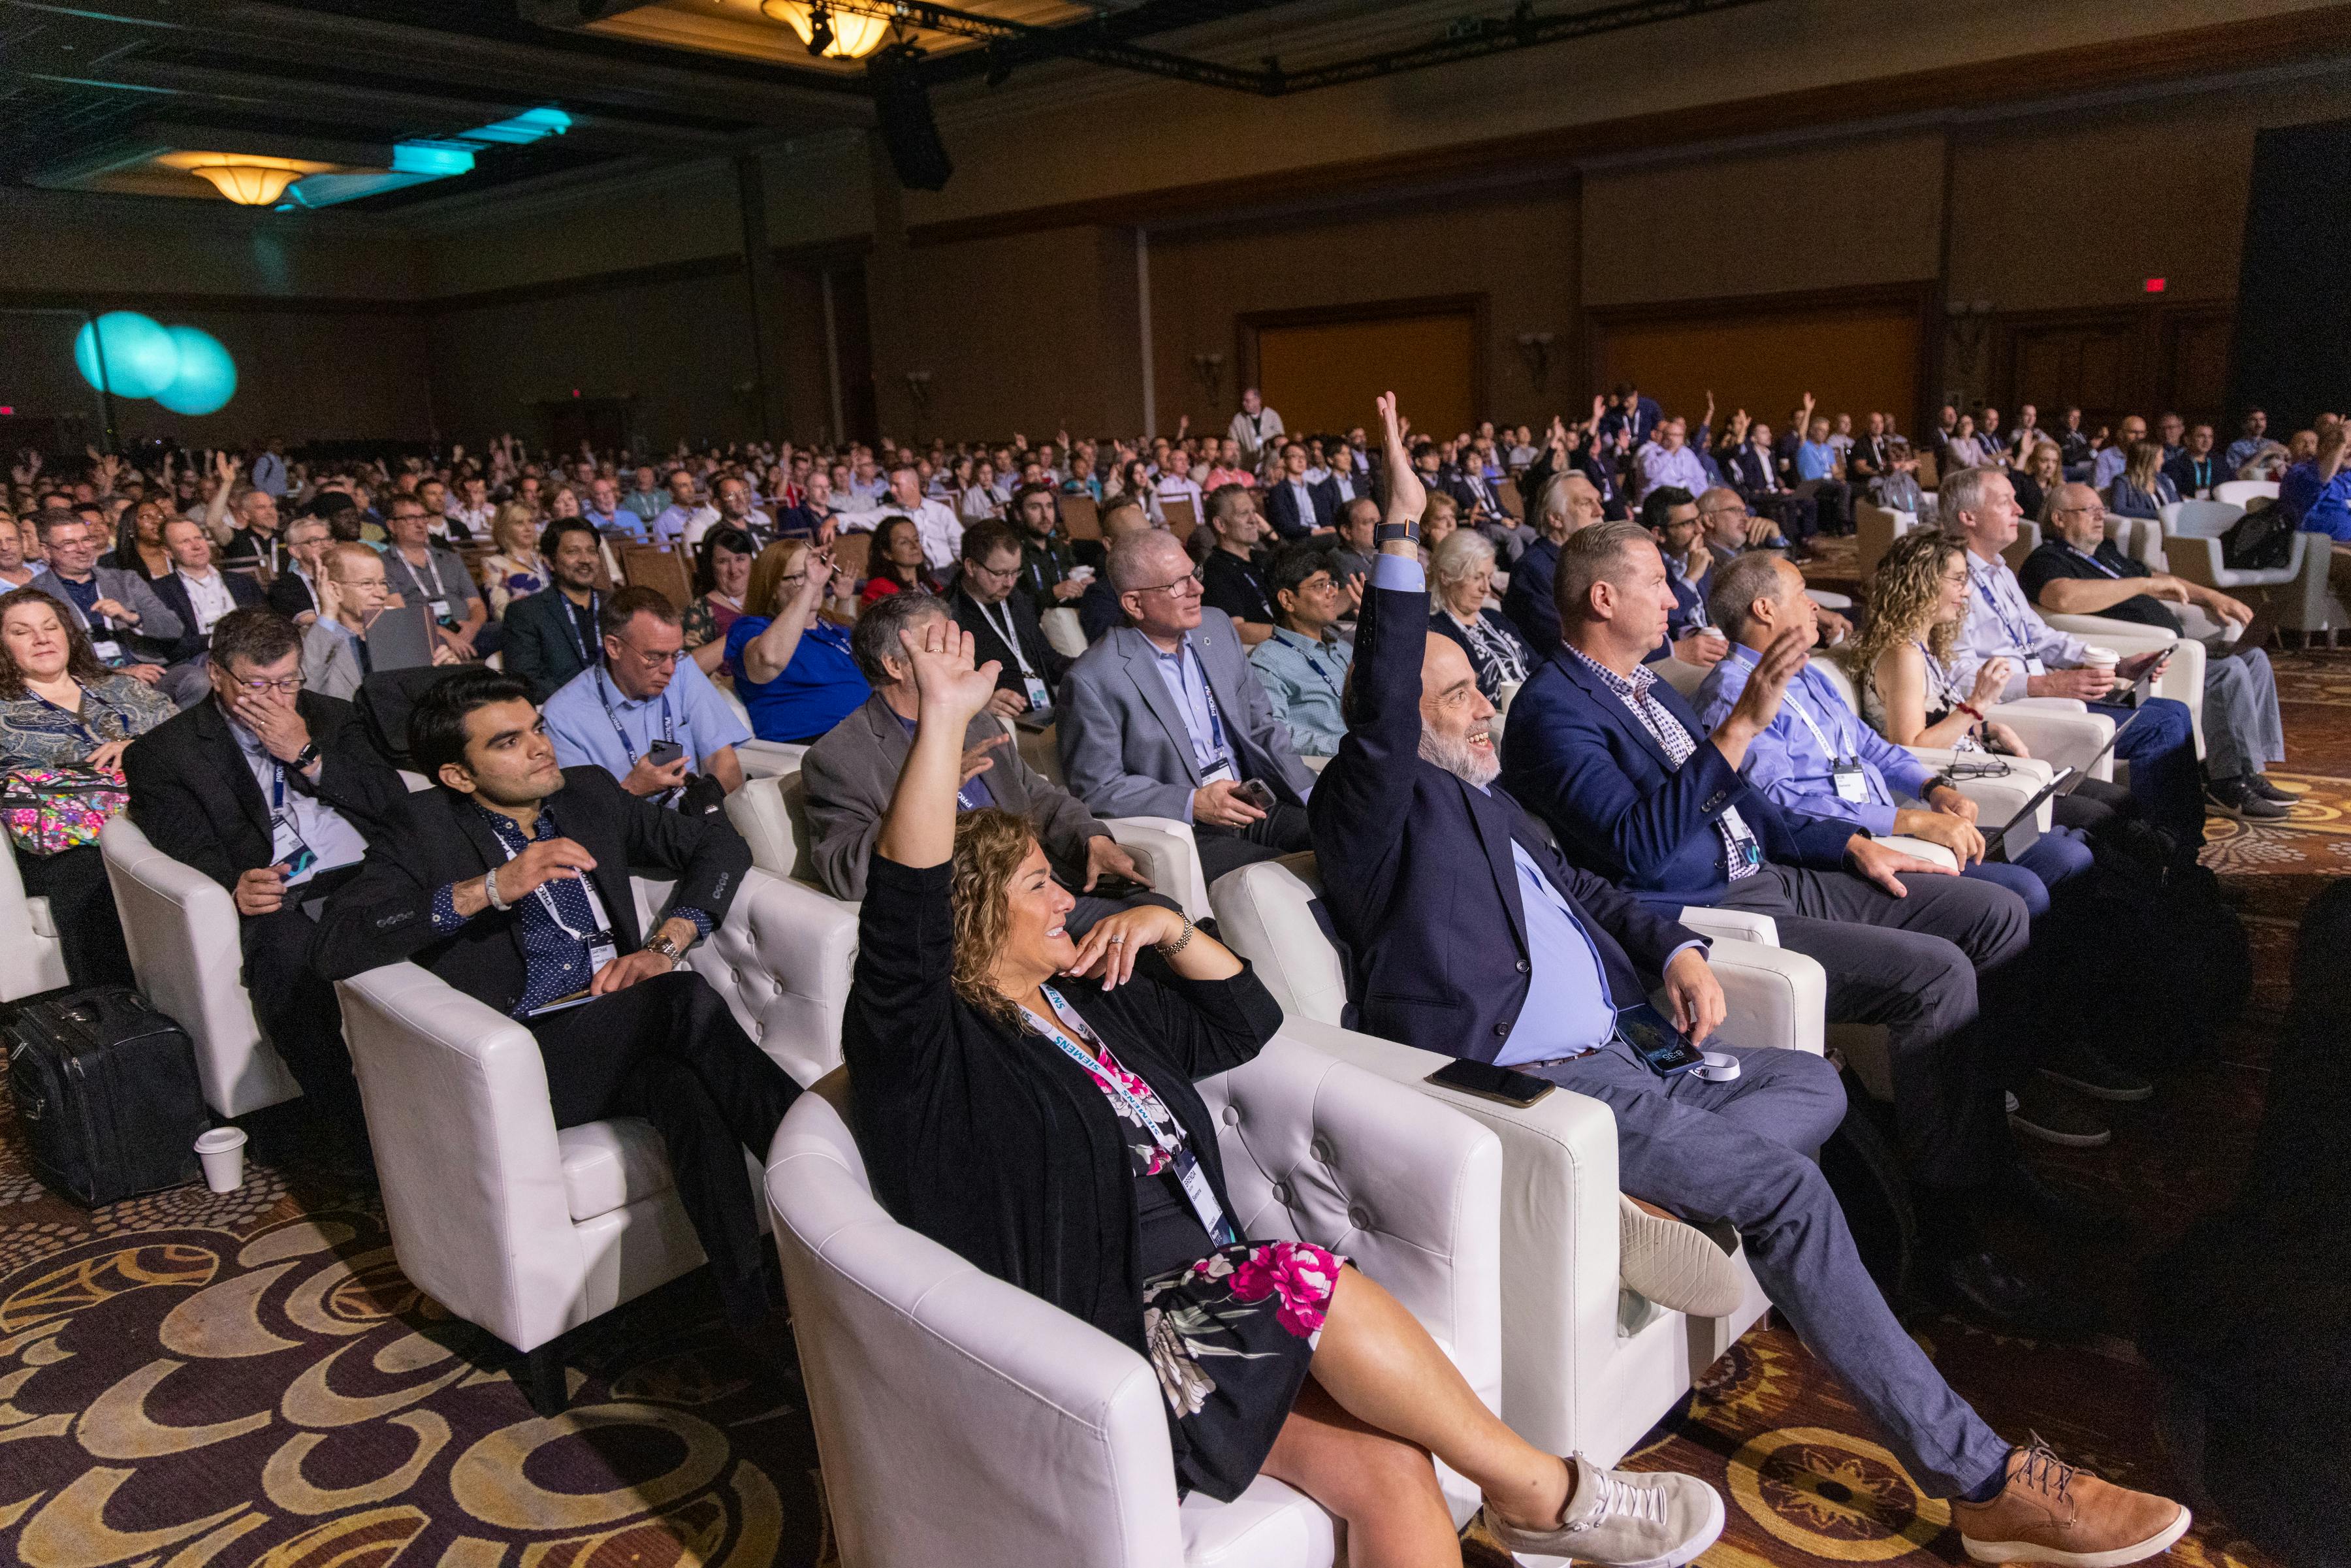 The crowd engages with the keynote speaker at Realize LIVE Americas